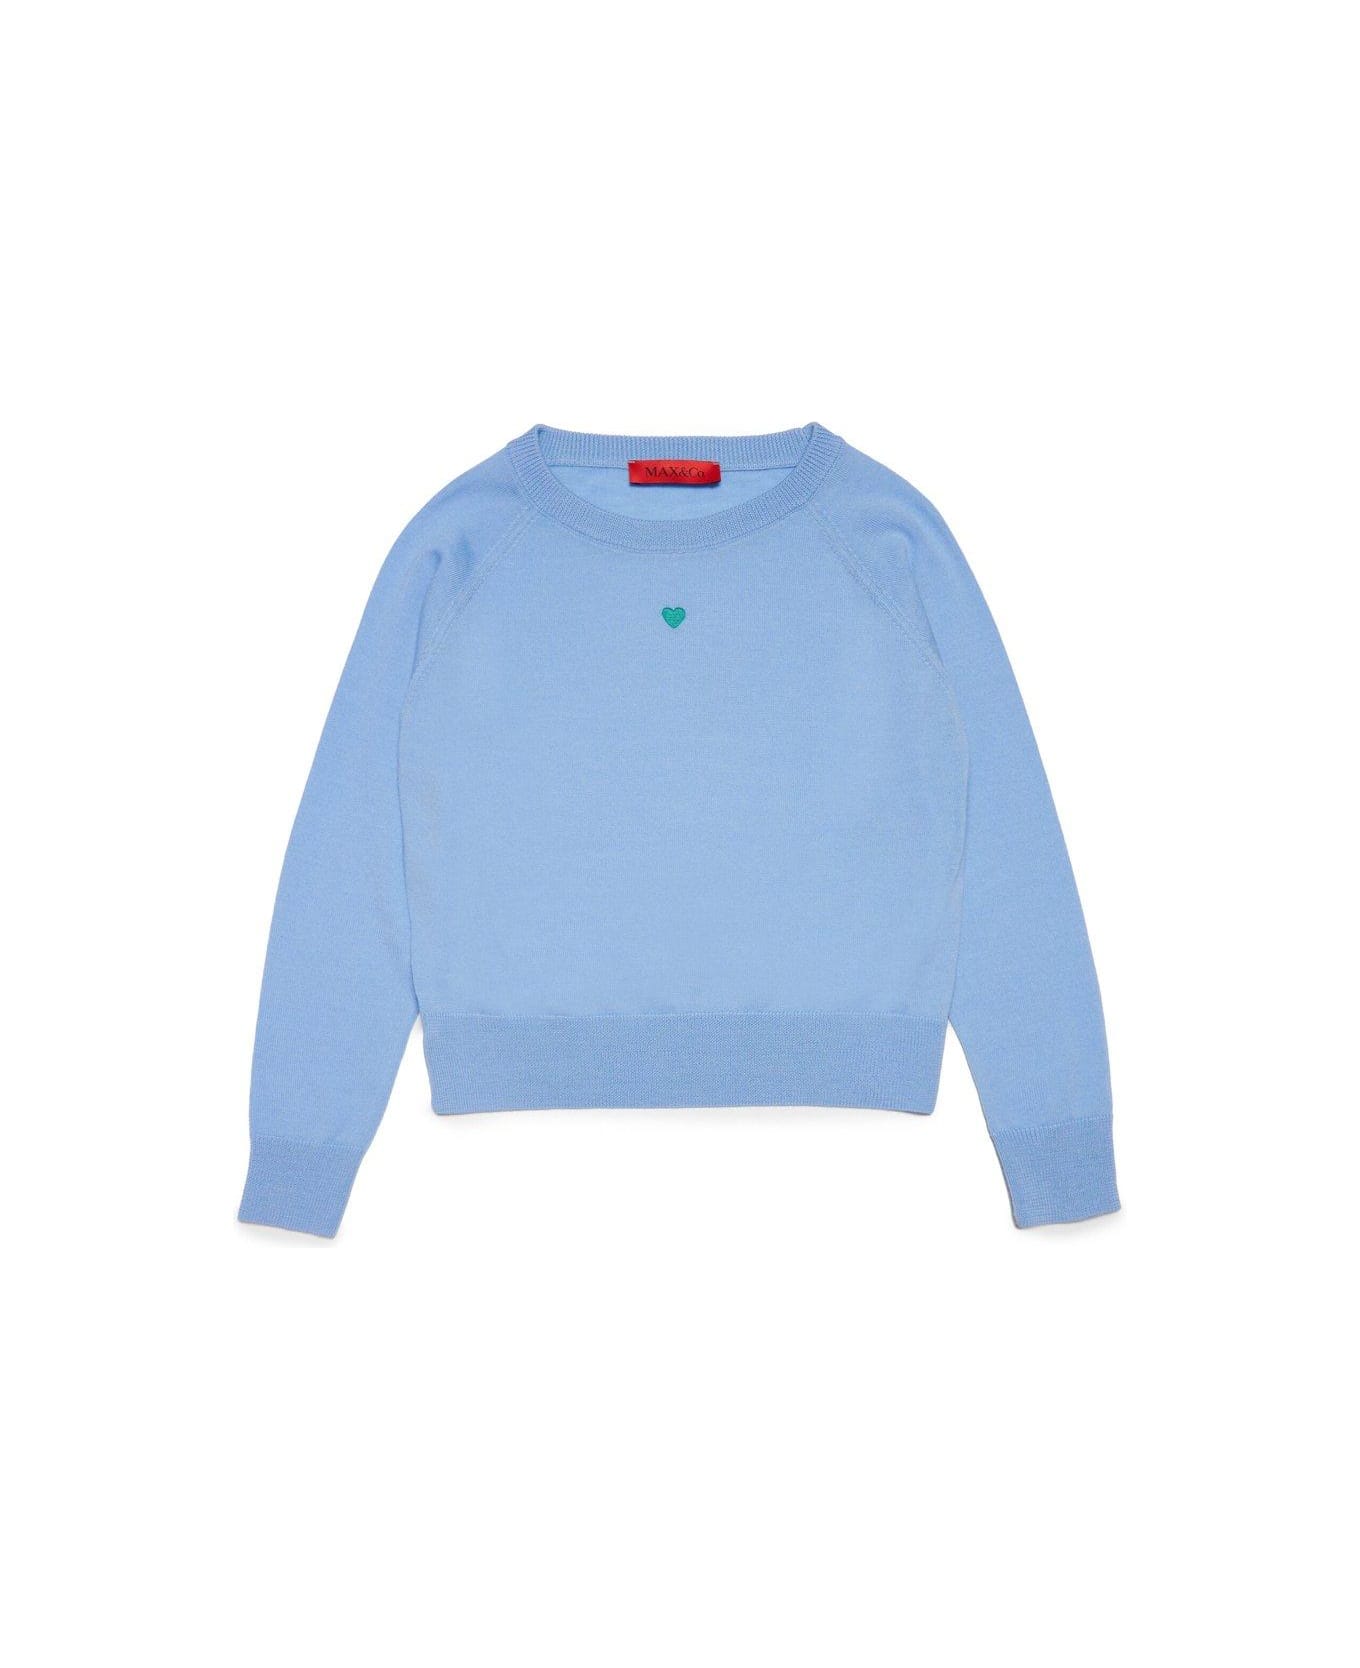 Max&Co. Heart Embroidered Knitted Jumper - Blue